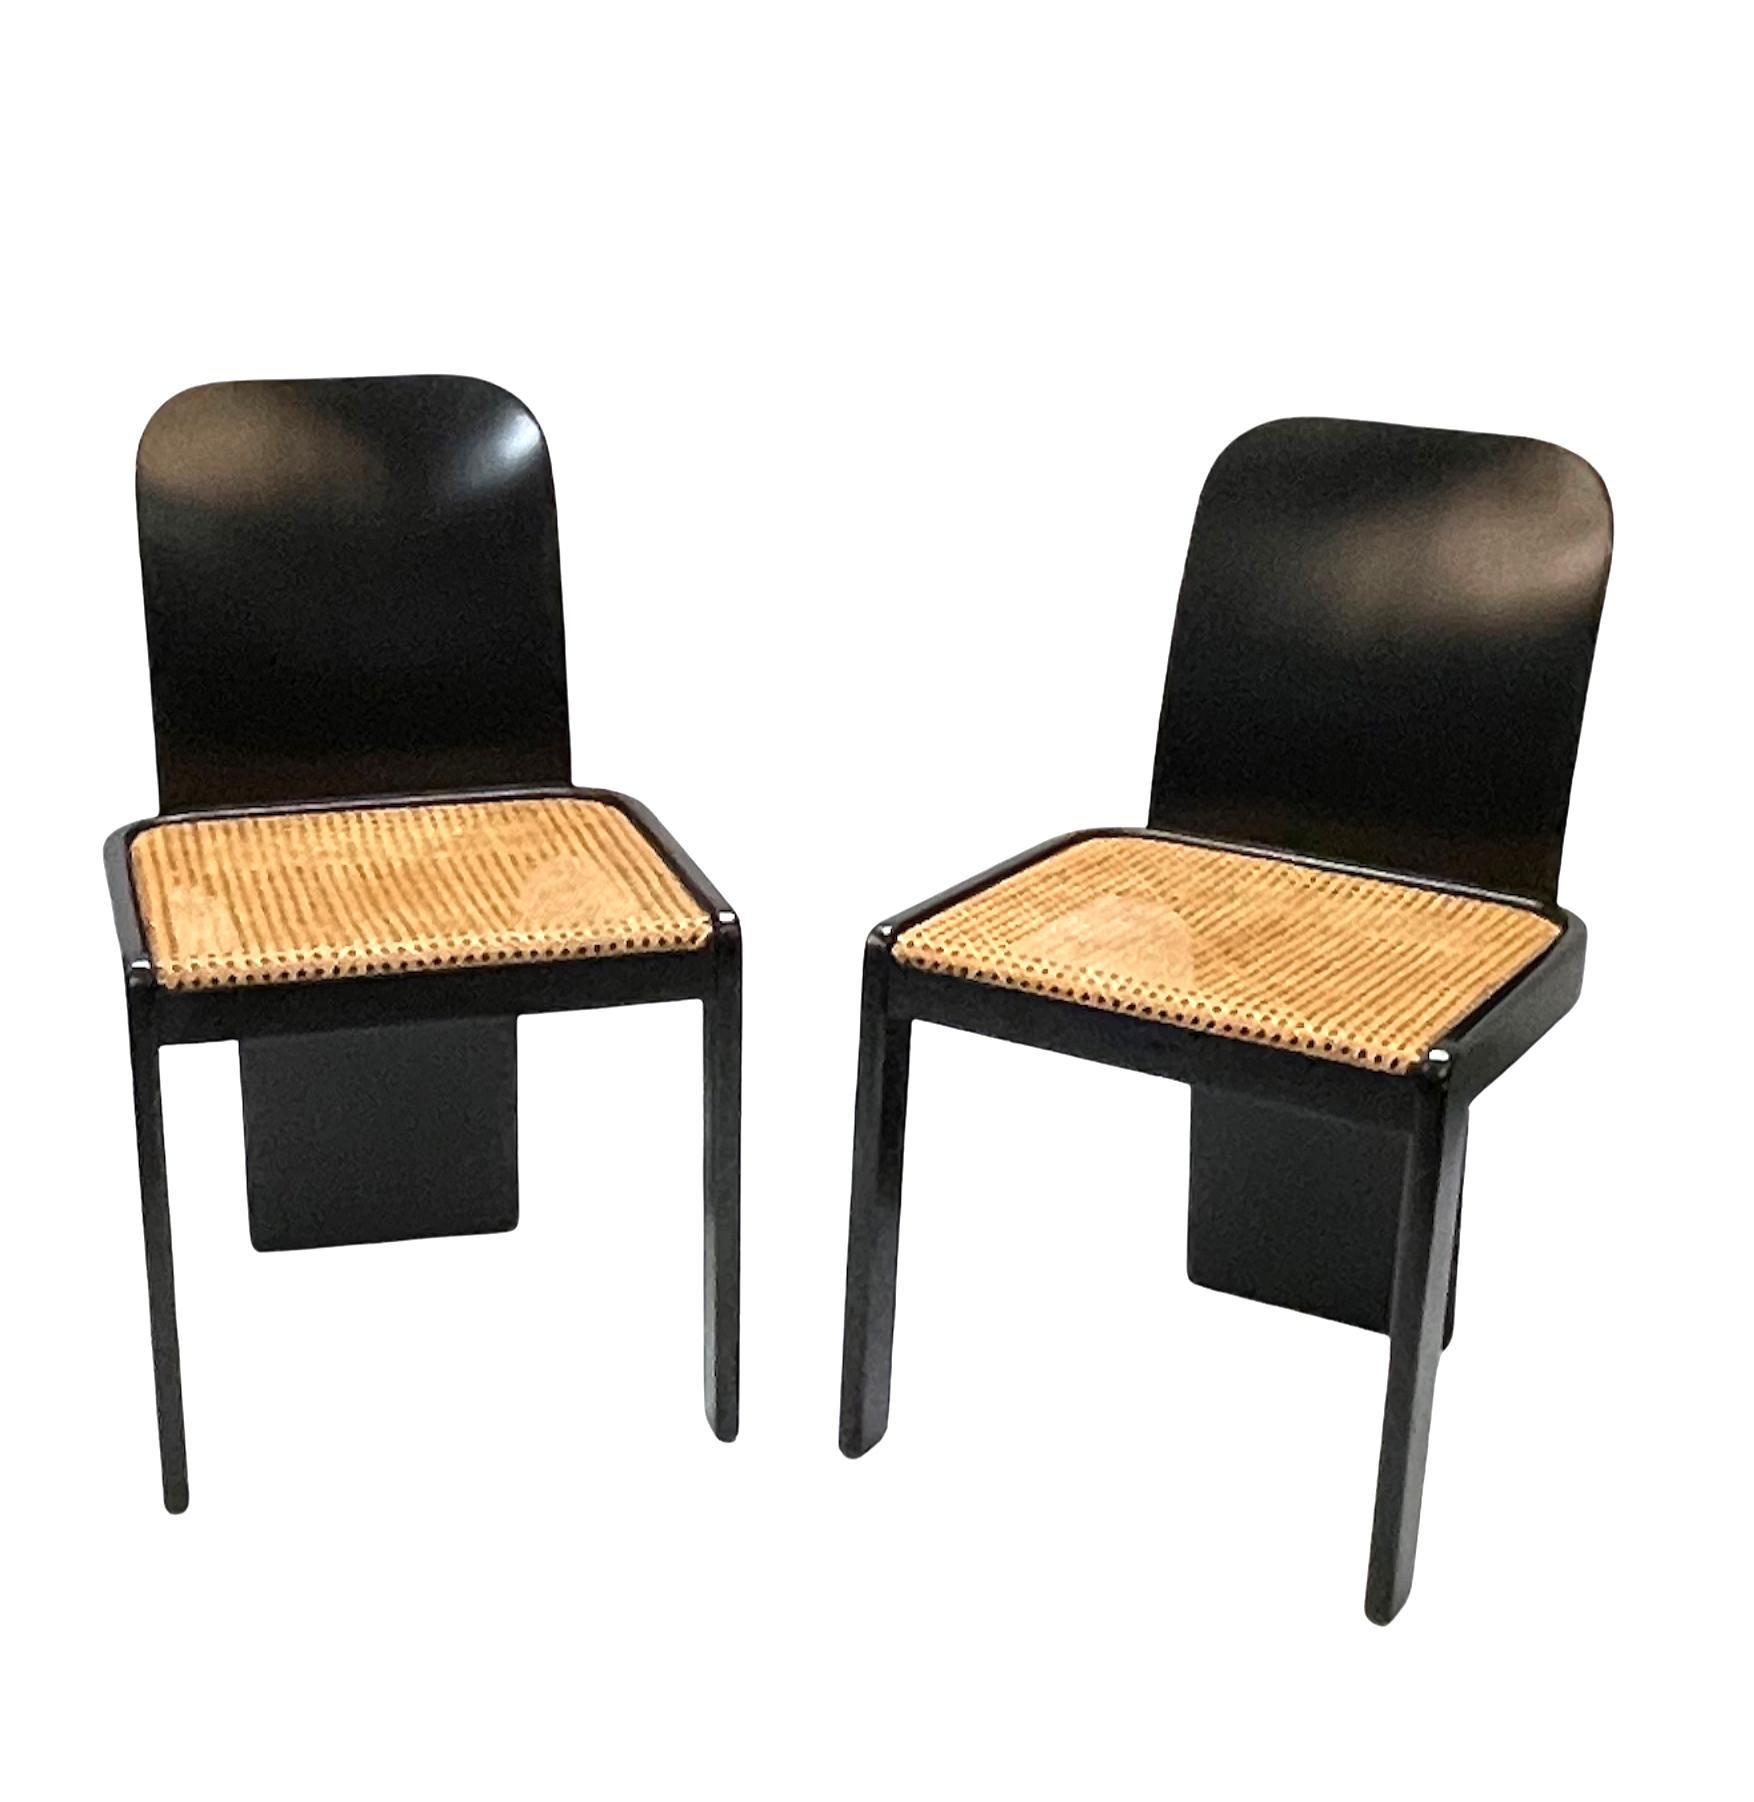 Amazing Mid-Century Modern set of 4 black wooden chairs with Vienna straw seat. These fantastic pieces were designed in Italy during the 1970s by Pierluigi Molinari for Pozzi.

These chairs are unique as they have a characteristic chrome detail on